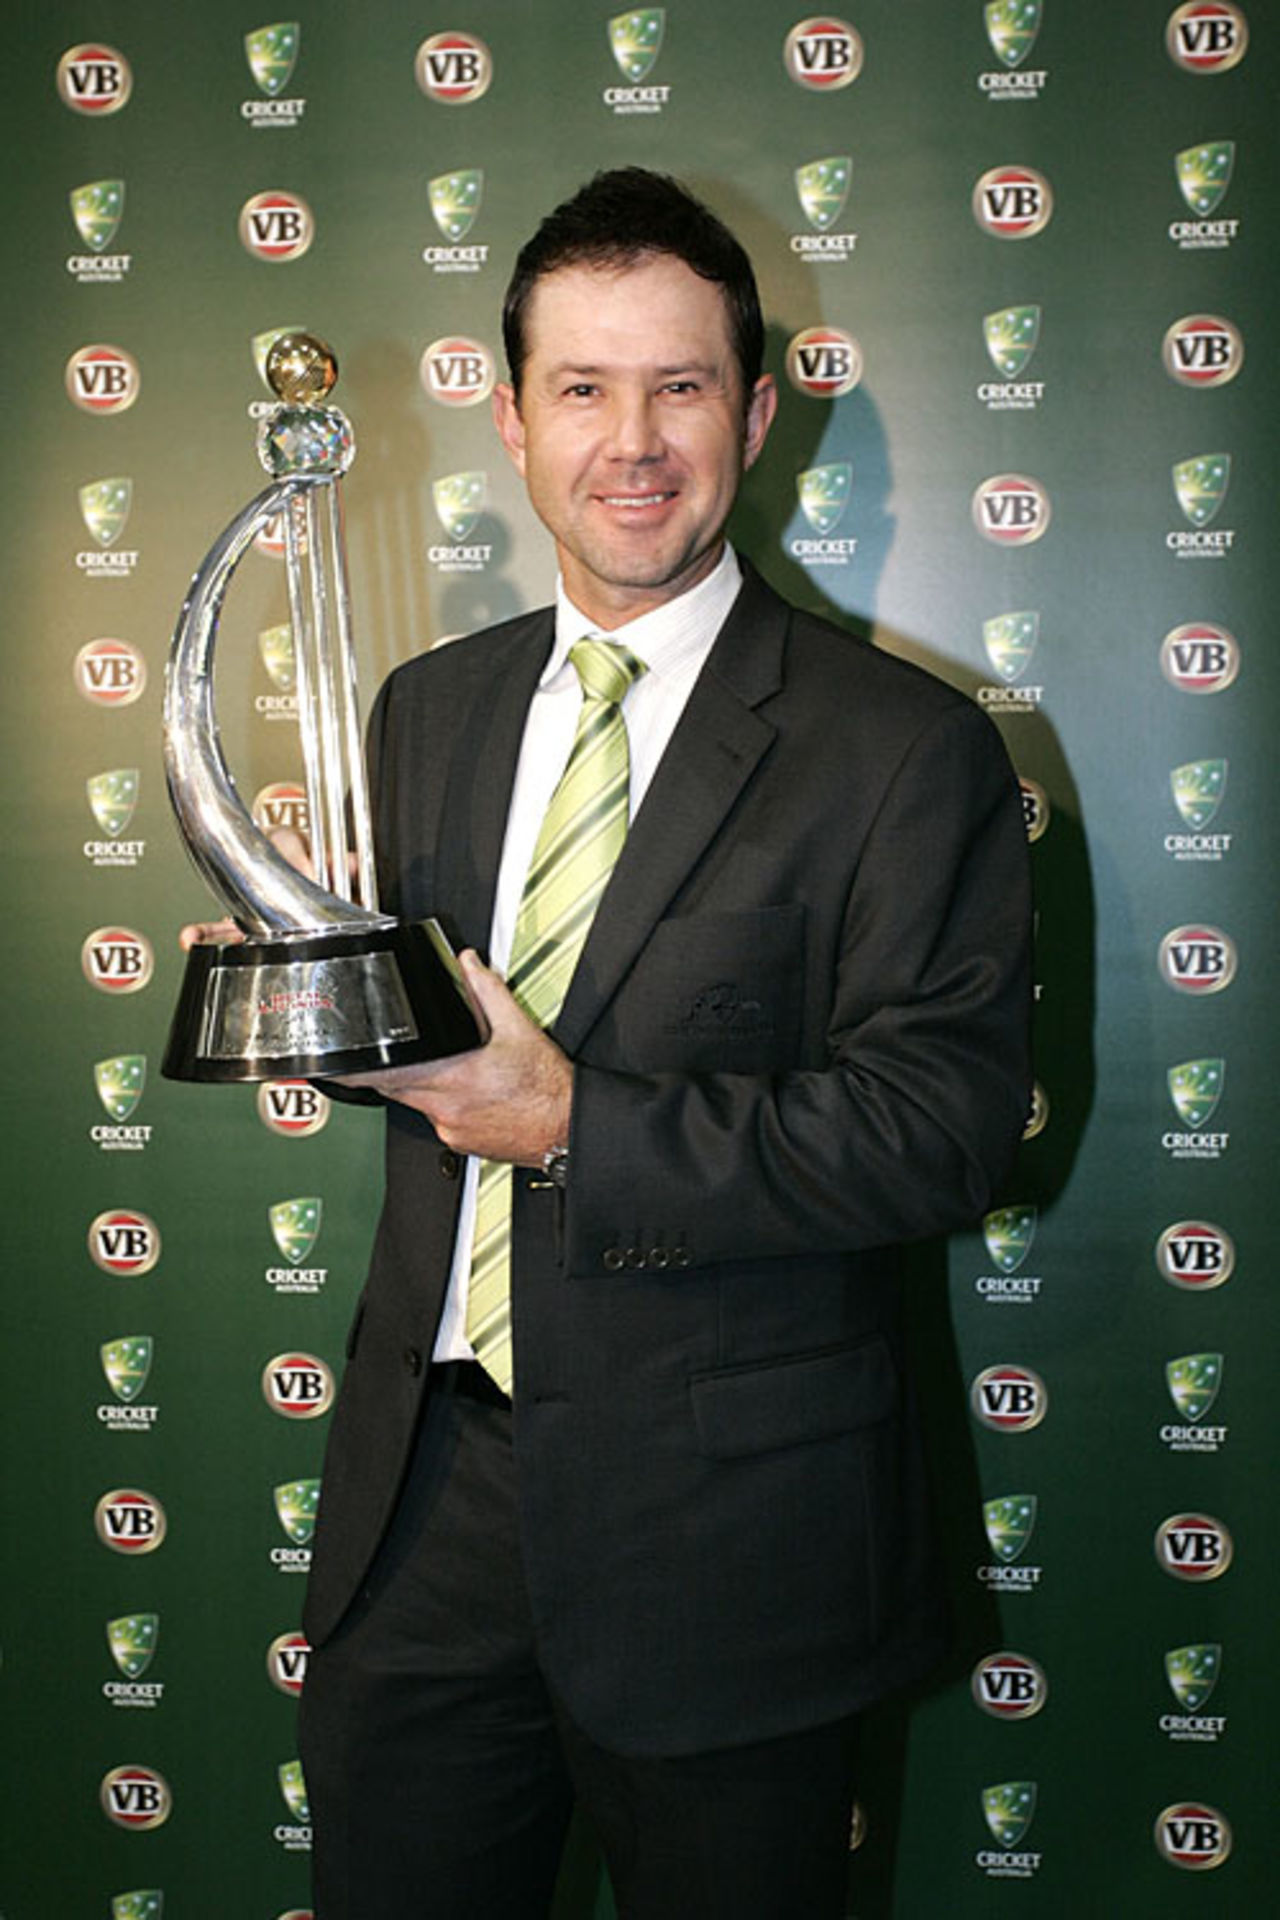 Ricky Ponting poses with the trophy on his return to Australia, Melbourne, November 12, 2009